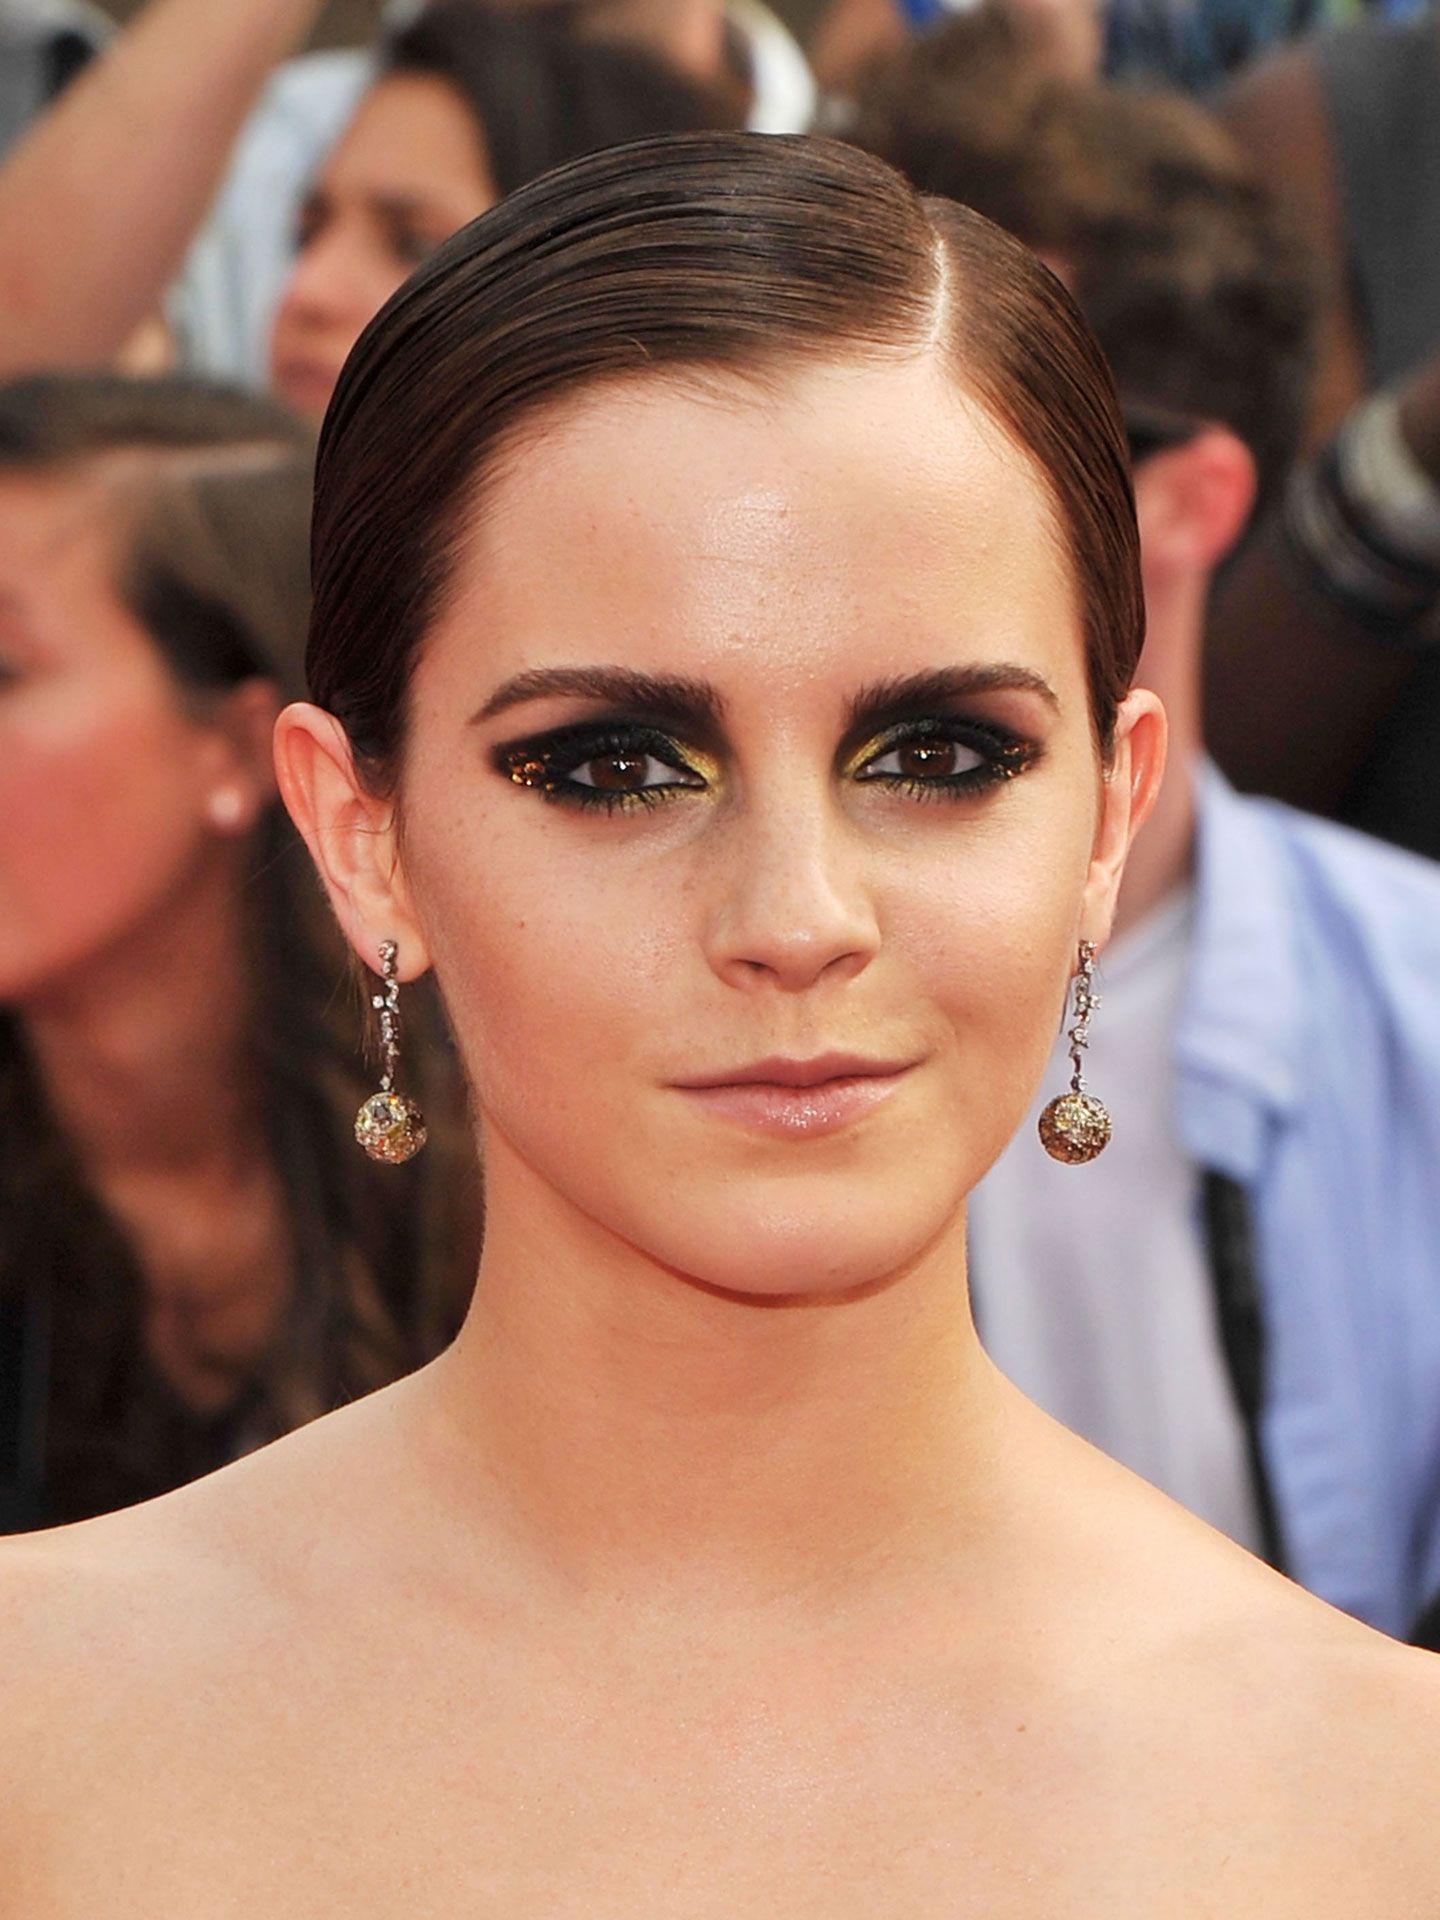 Emma Watson Hair And Makeup Pictures Of Emma Watsons Hair And